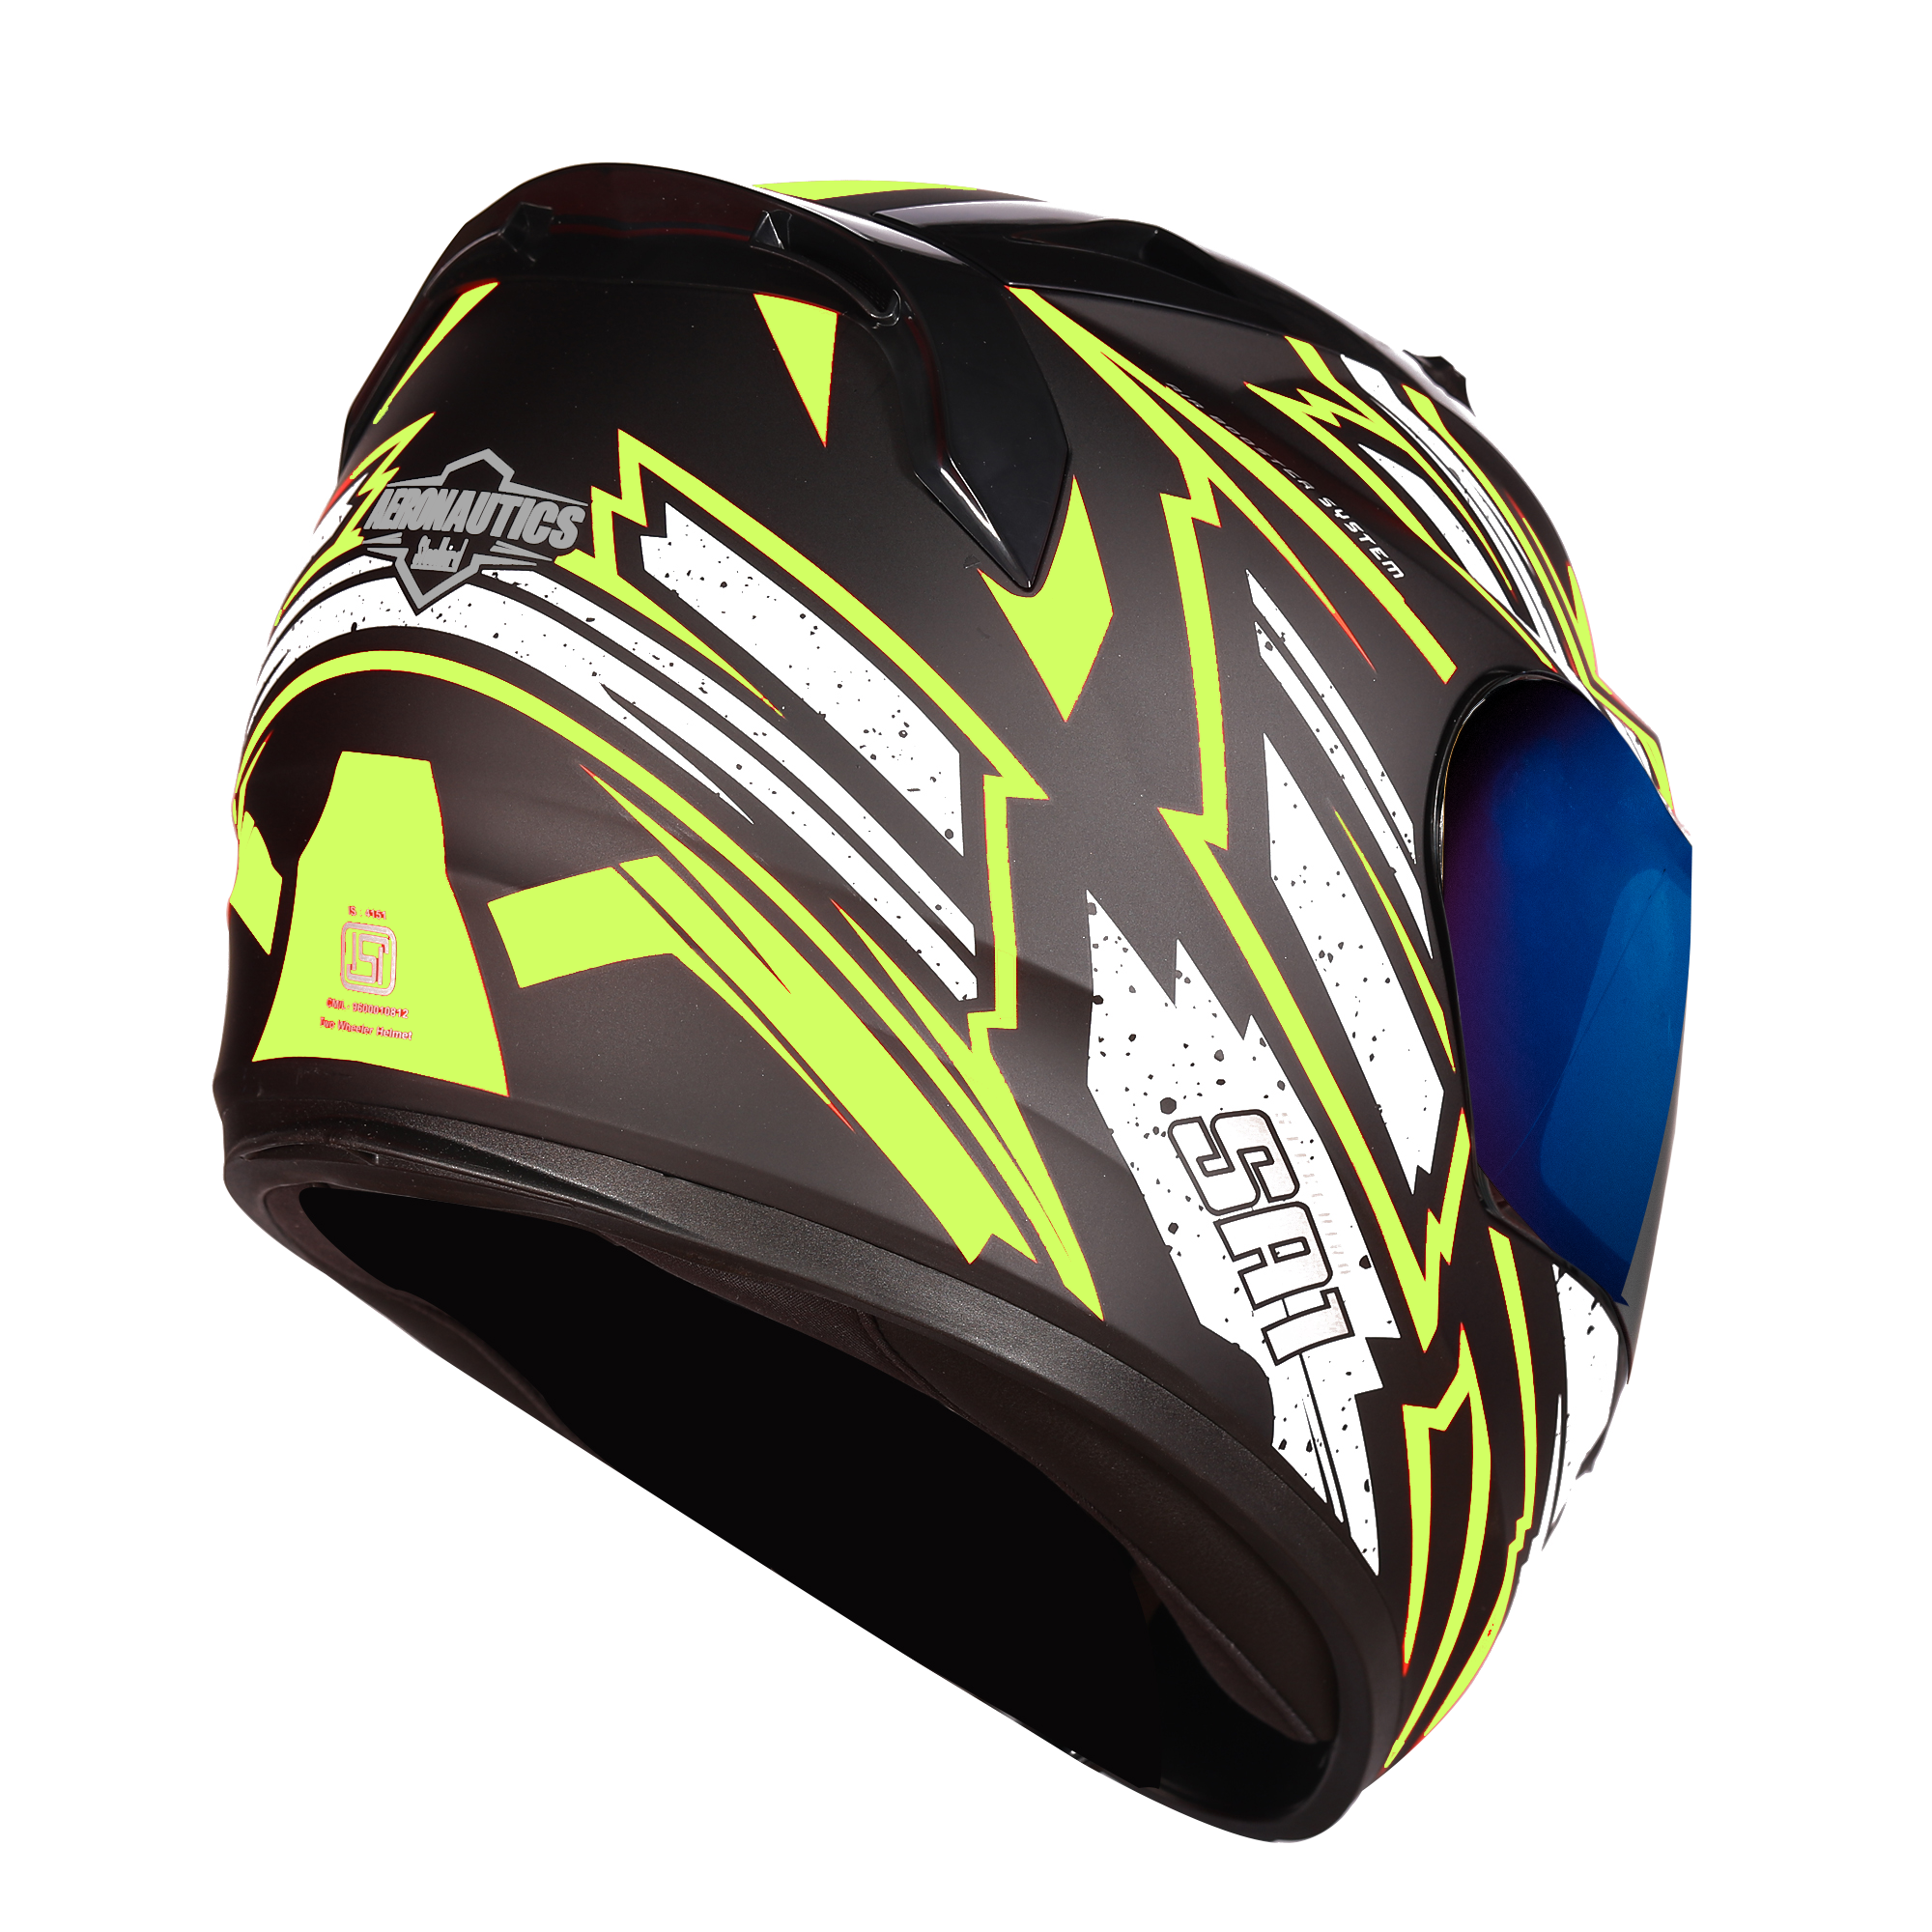 SA-1 BOOSTER MAT BLACK WITH NEON - CHROME BLUE VISOR (WITH EXTRA CLEAR VISOR)